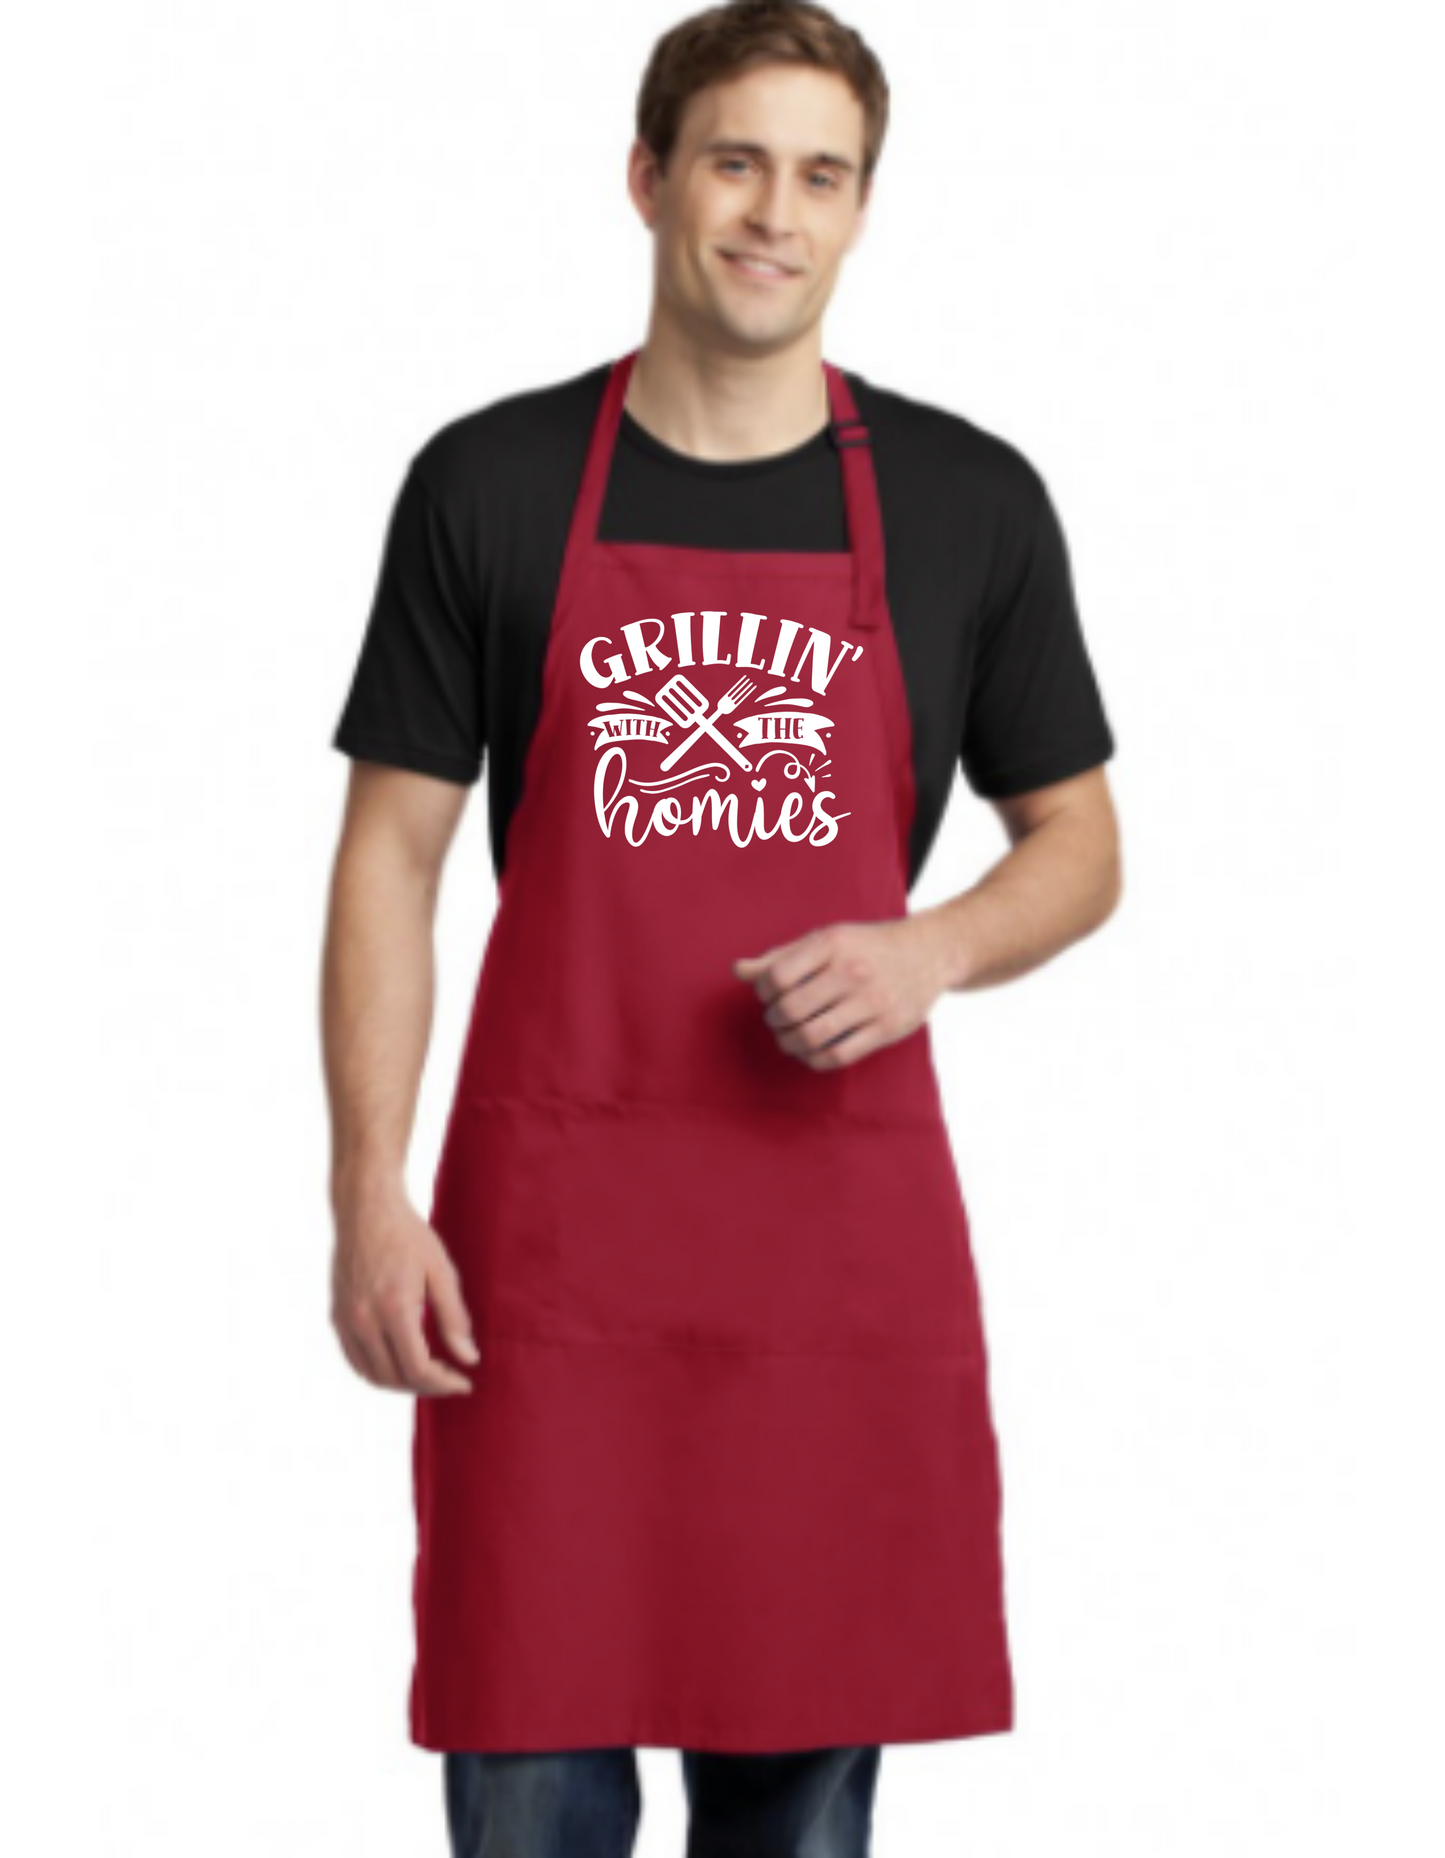 Grillin' With My Homies Apron - Great Gift - Commercial Grade - Mister Snarky's